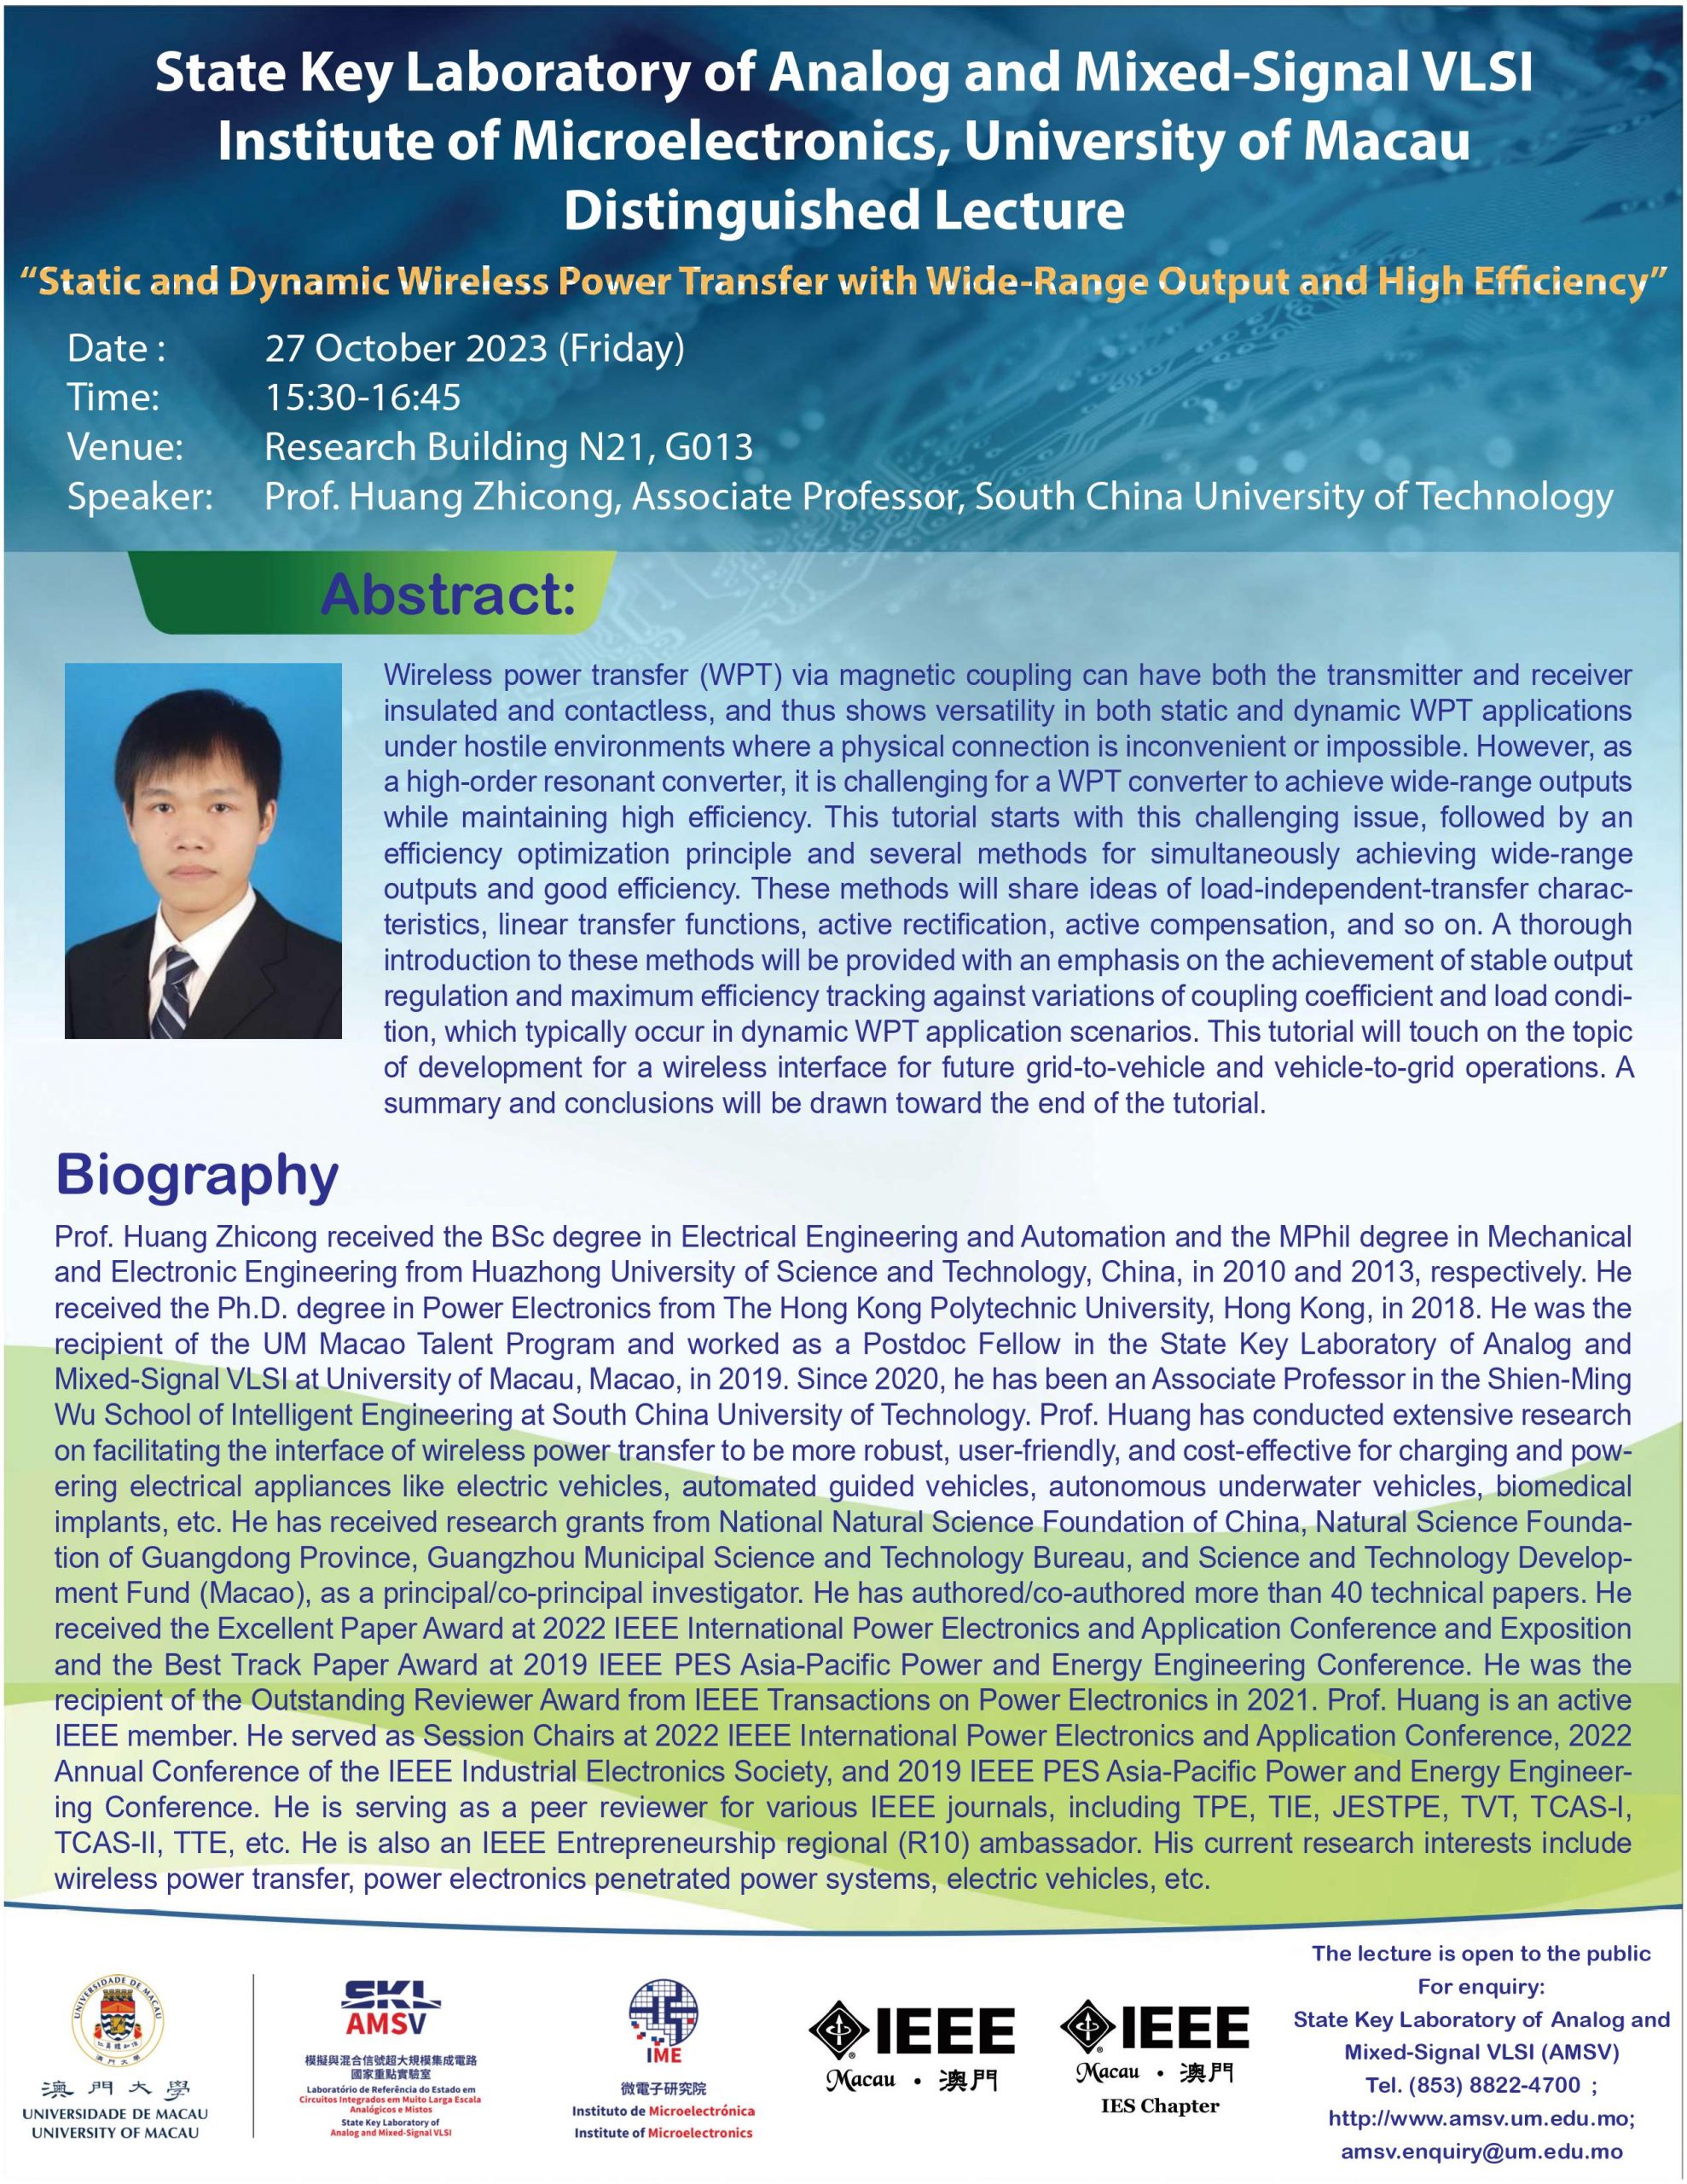 Poster - Prof. Zhicong Huang